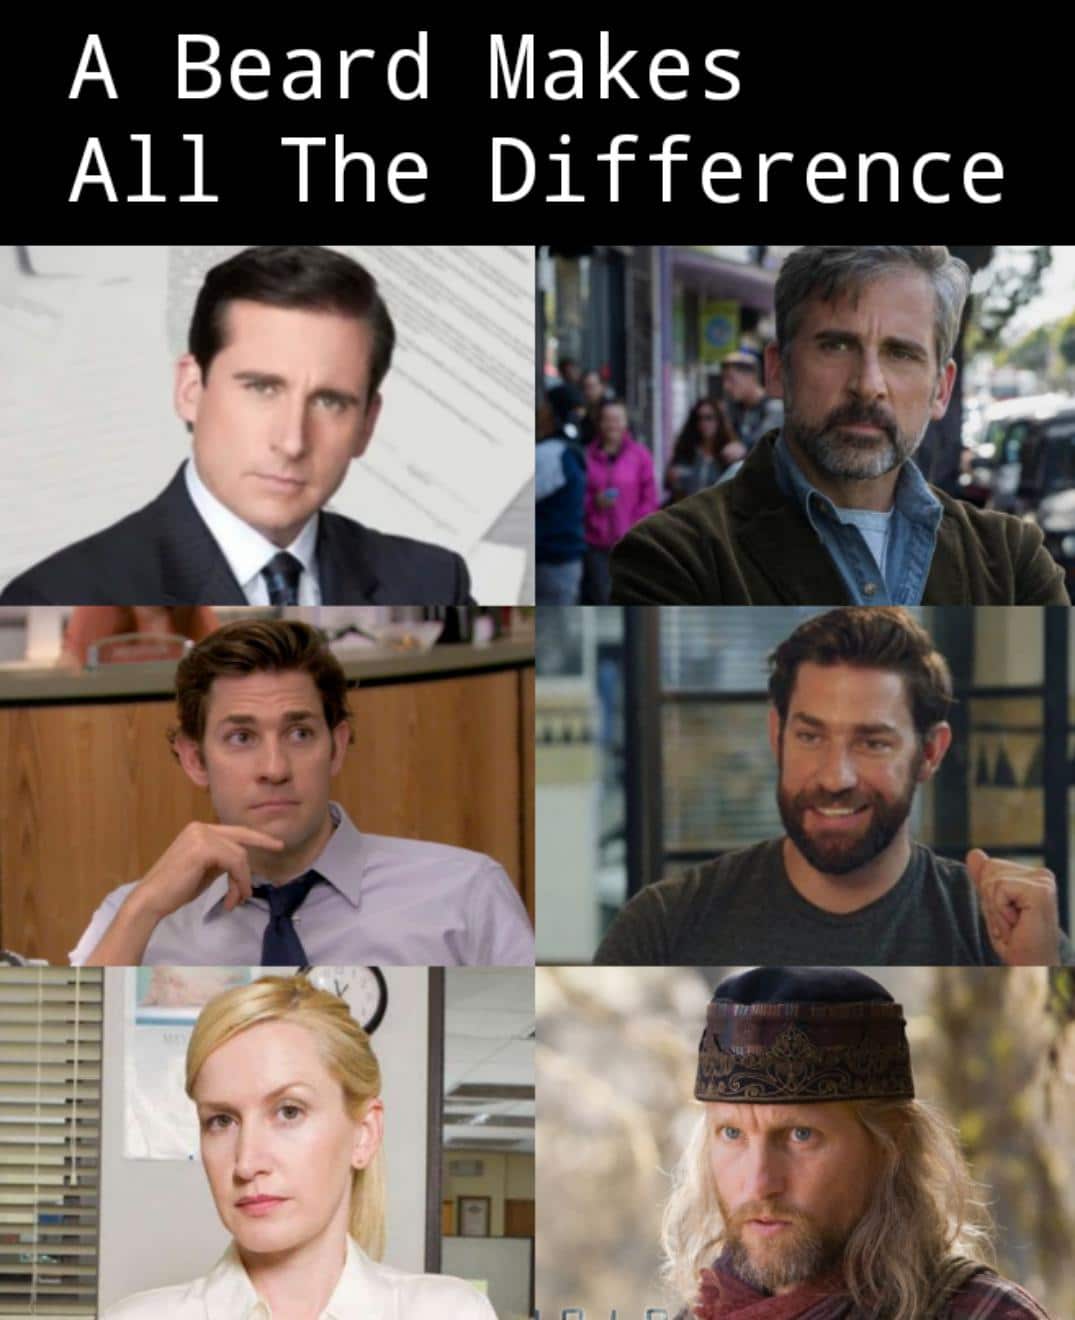 Funny, Angela, Joel, Br, Steve Carell, Carell other memes Funny, Angela, Joel, Br, Steve Carell, Carell text: A Beard Makes All The Difference 